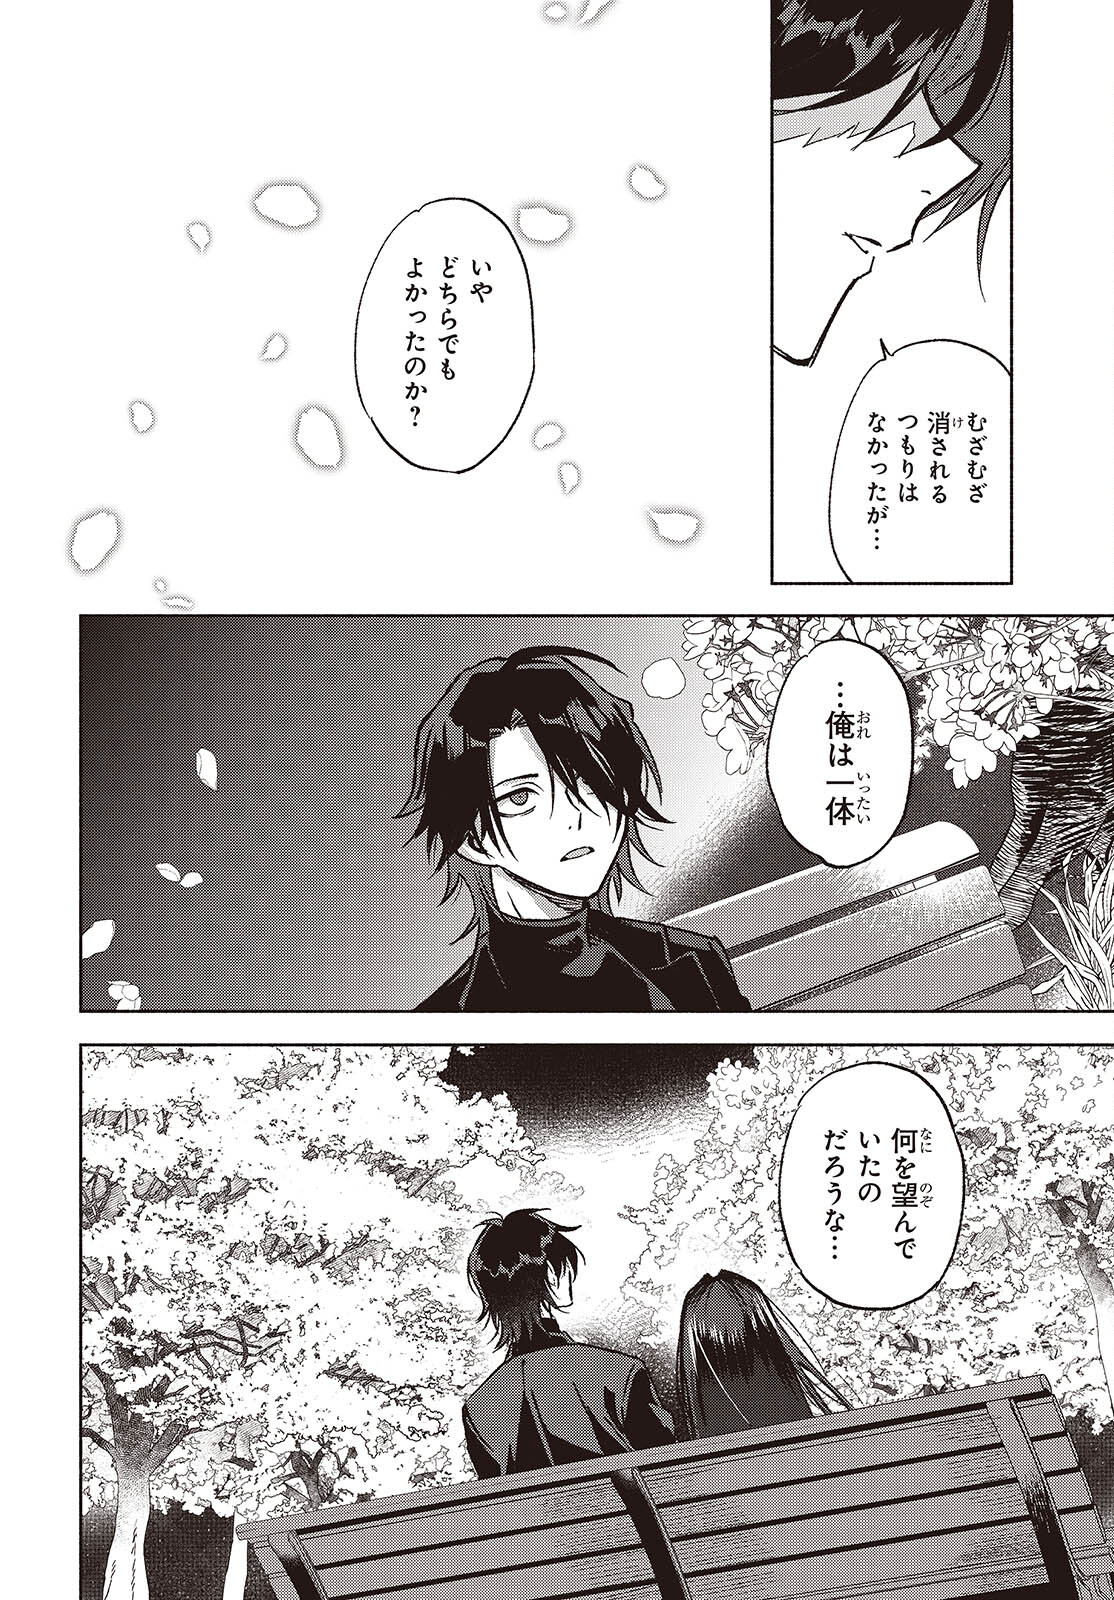 Missing 第9話 - Page 6